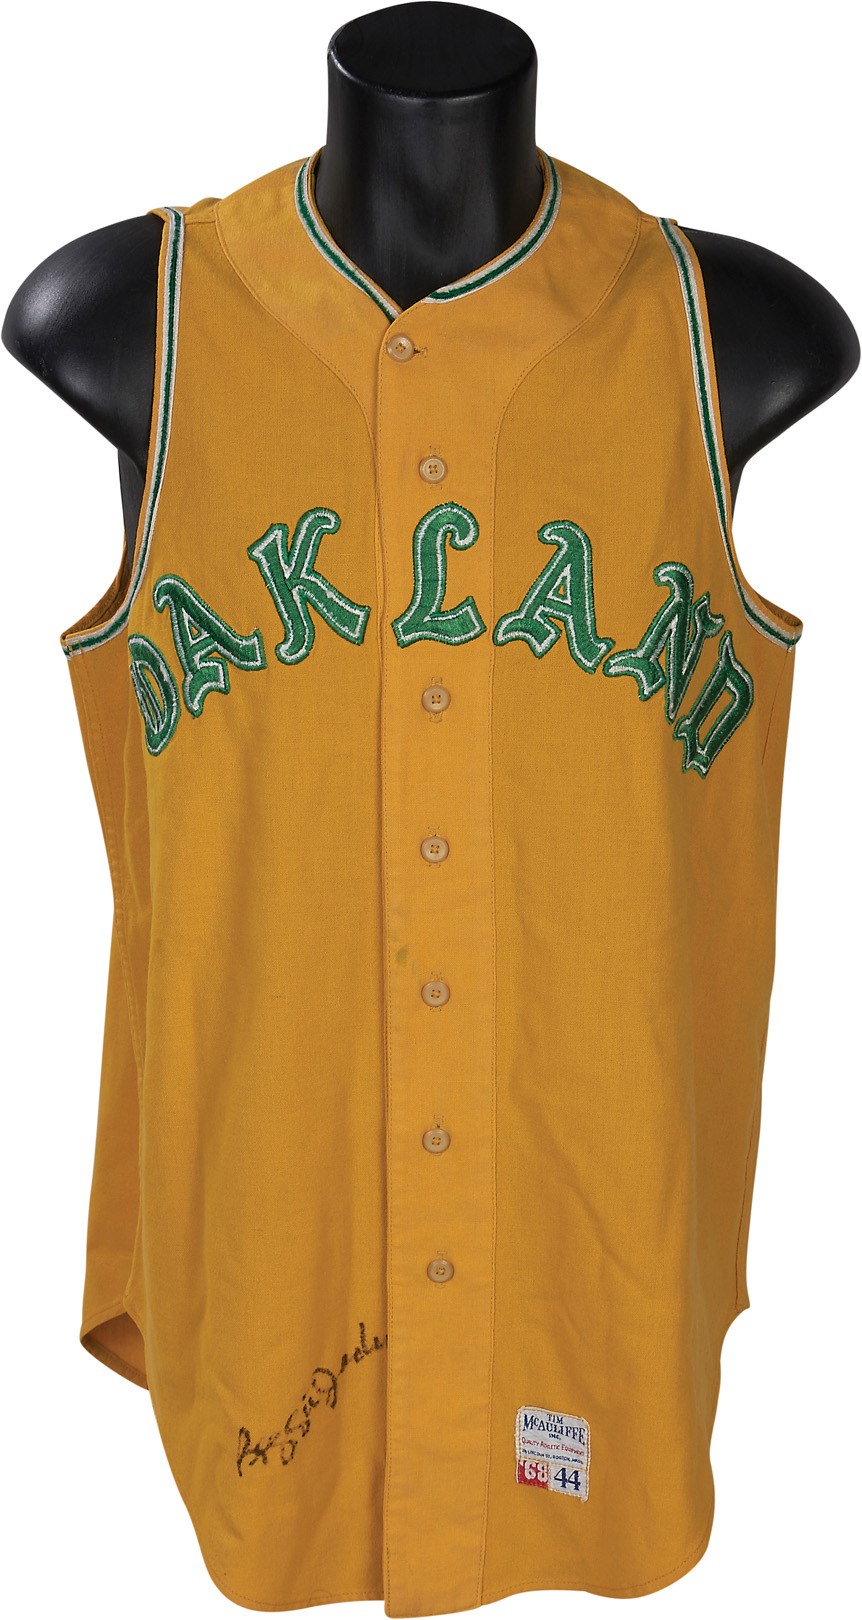 Baseball Equipment - 1968 Reggie Jackson Oakland A's Game Worn Signed Rookie Jersey (MEARS 10)